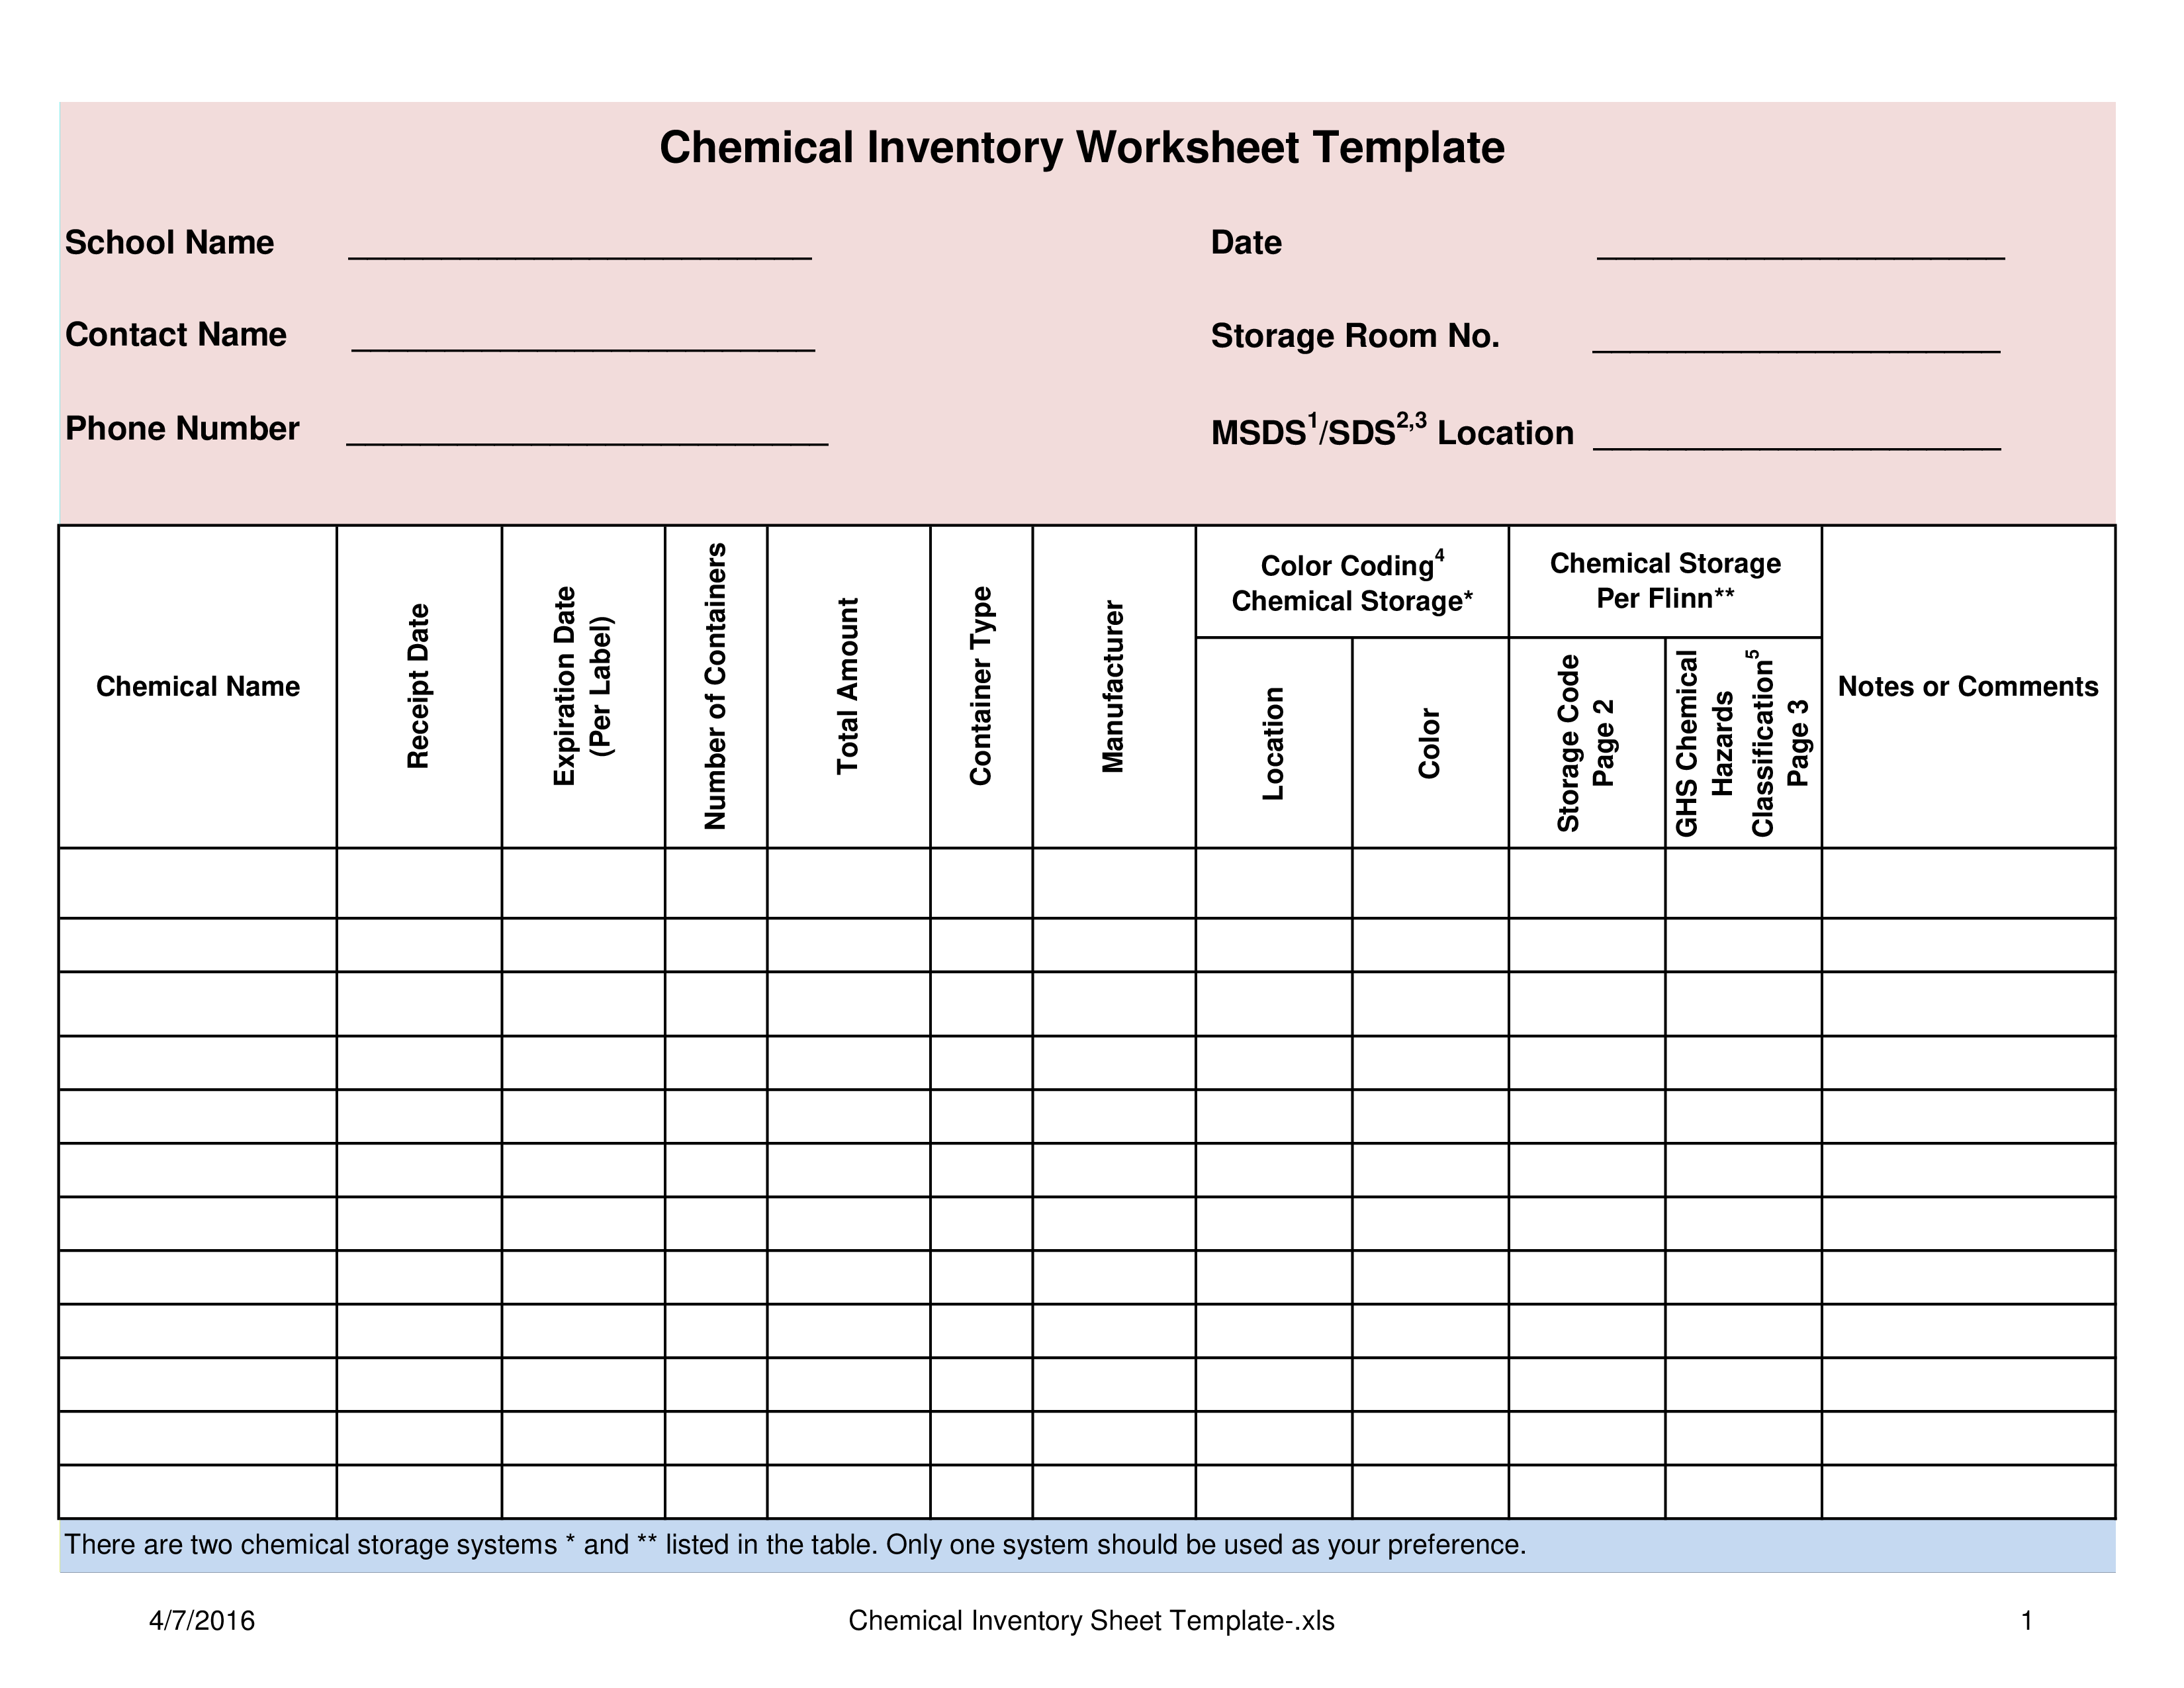 Chemical Inventory Worksheet Template Templates At 